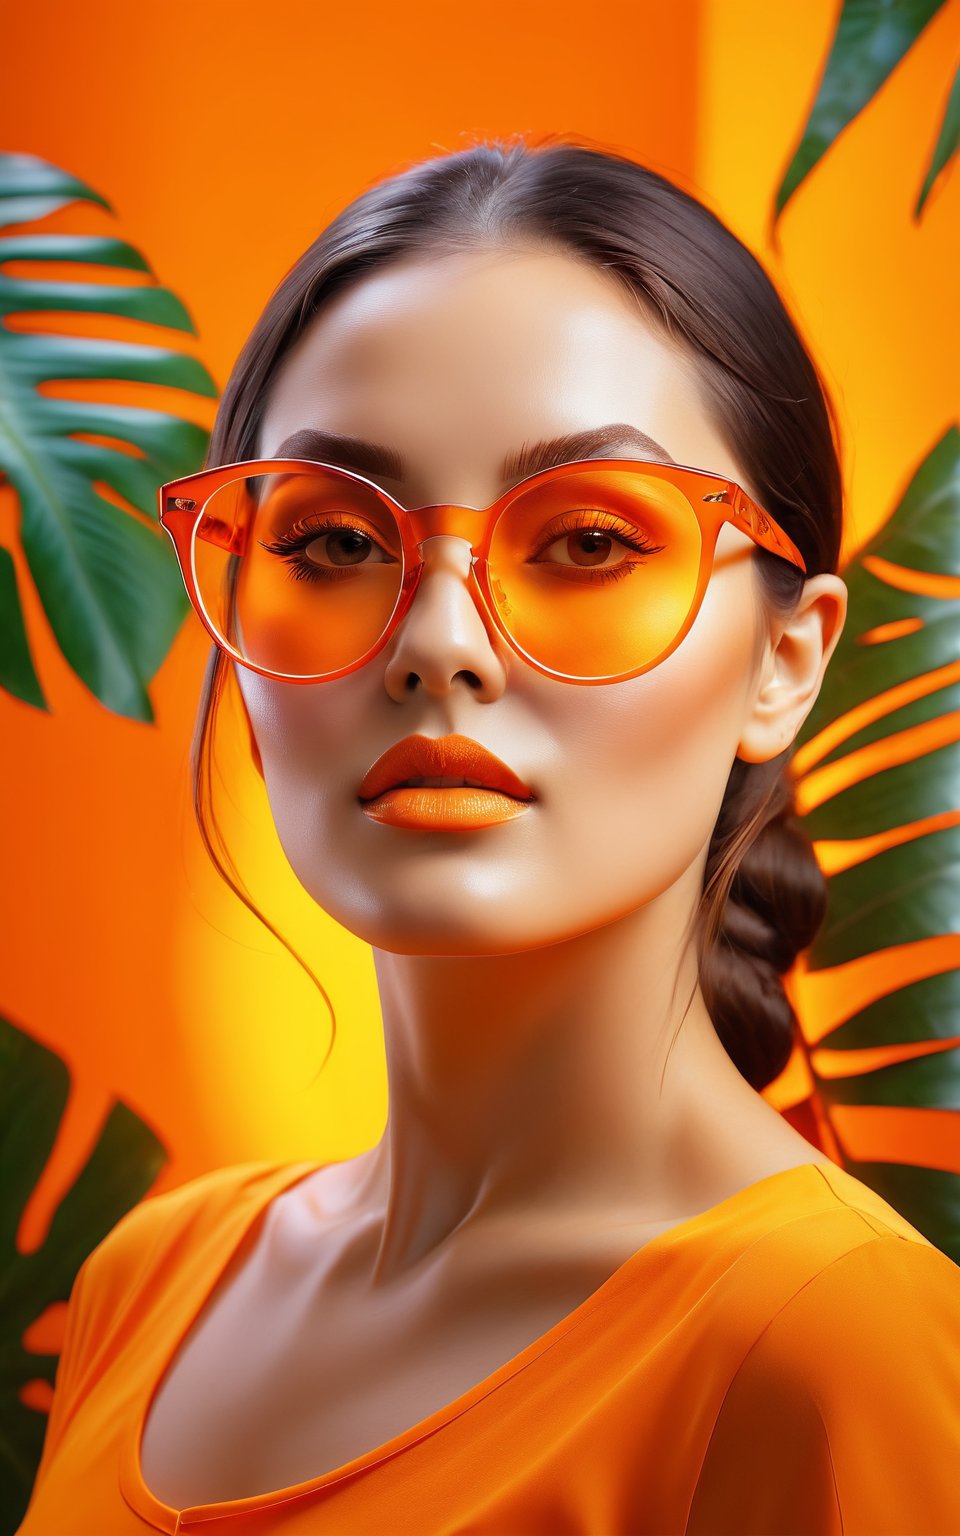 (best quality, 4K, 8K, high-resolution, masterpiece, ultra-detailed, photorealistic), double exposure effect, woman with glasses, vibrant orange background, tropical theme, surreal and artistic composition, glowing and reflective glasses, high contrast, dynamic lighting, ethereal ambiance.